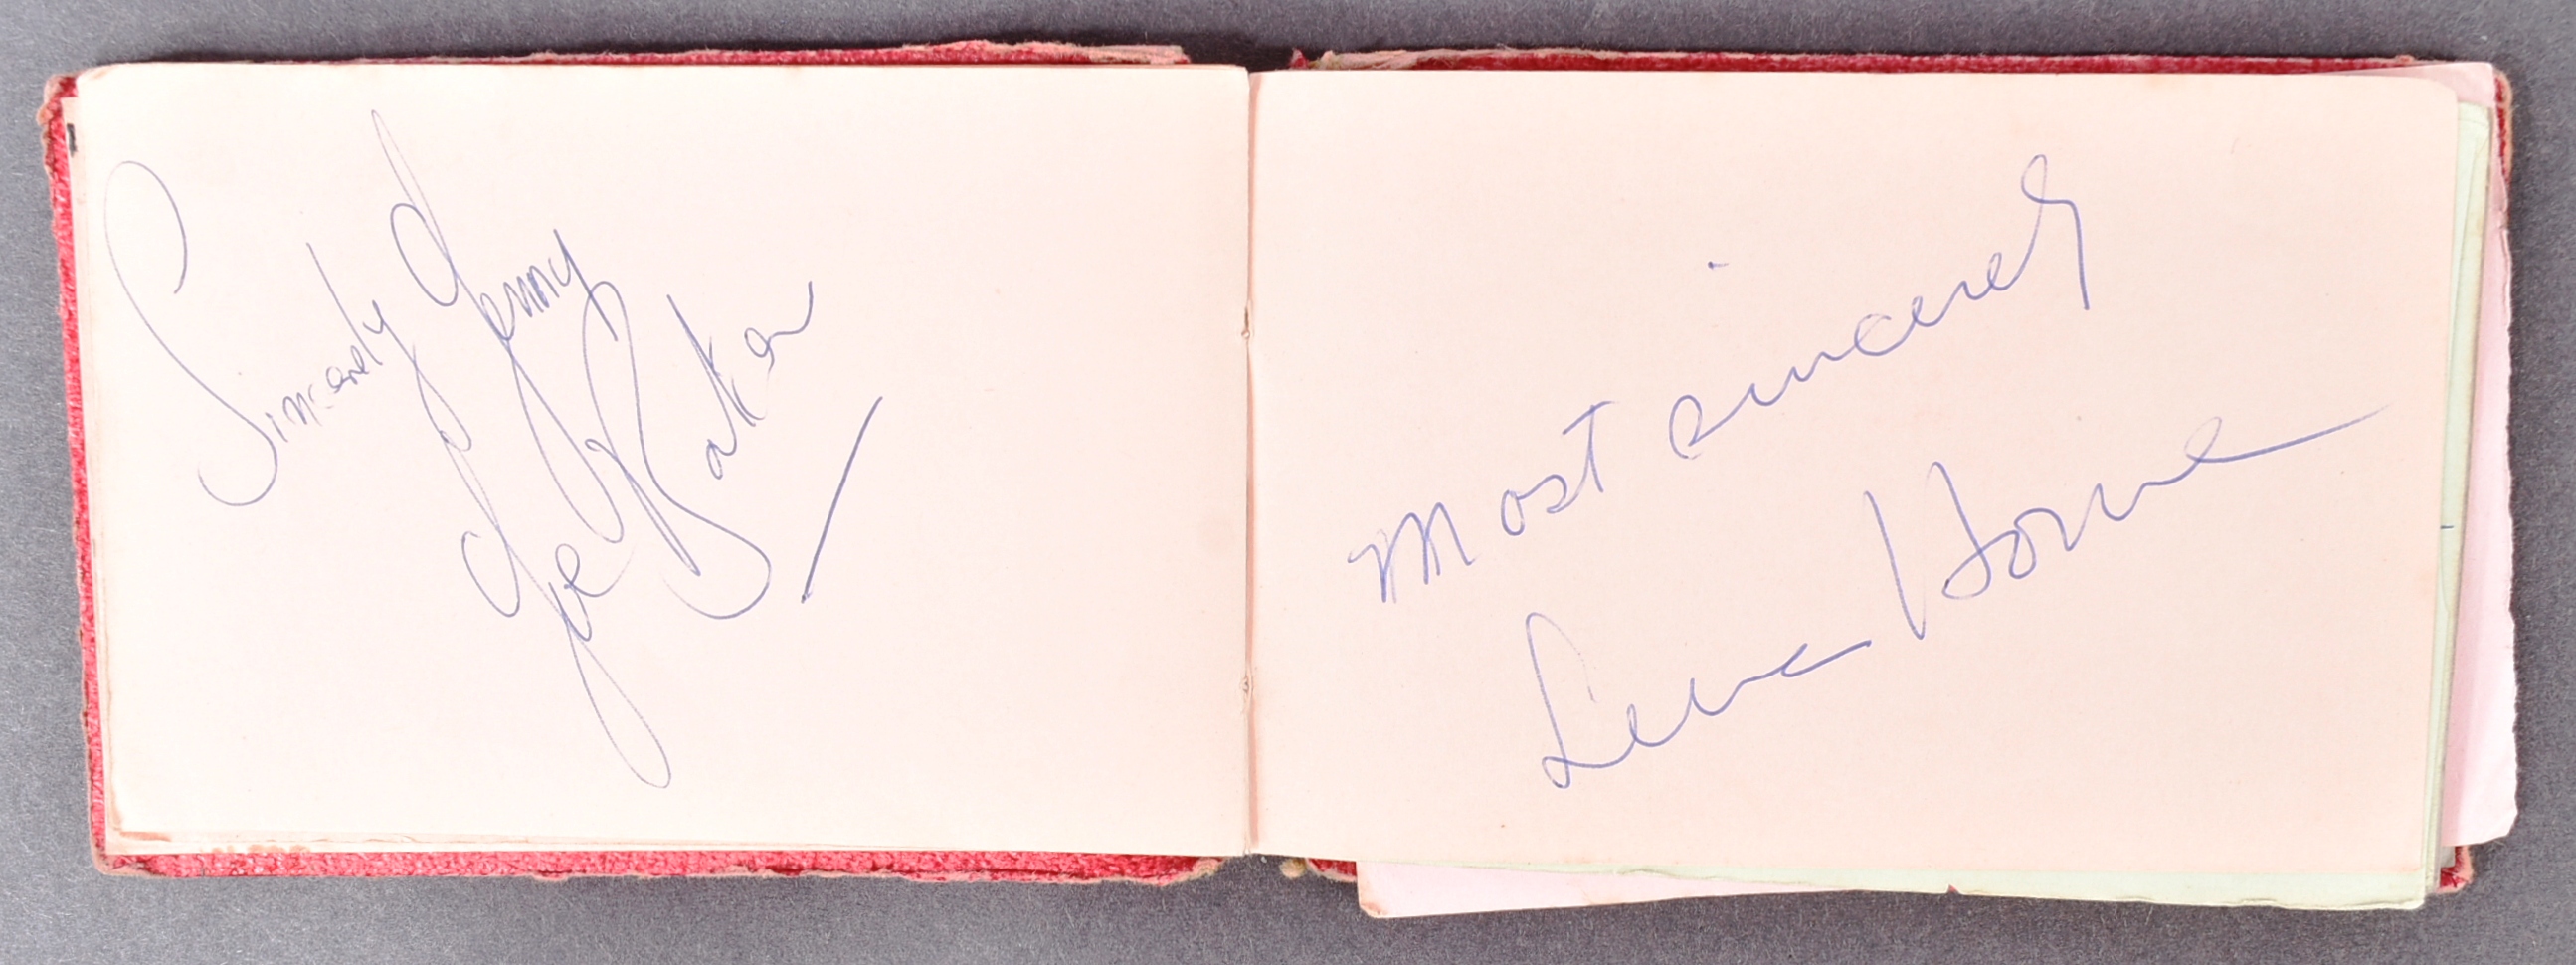 GERALD WHITNEY COLLECTION (CAMERA MAN) - AUTOGRAPH BOOK - Image 6 of 8